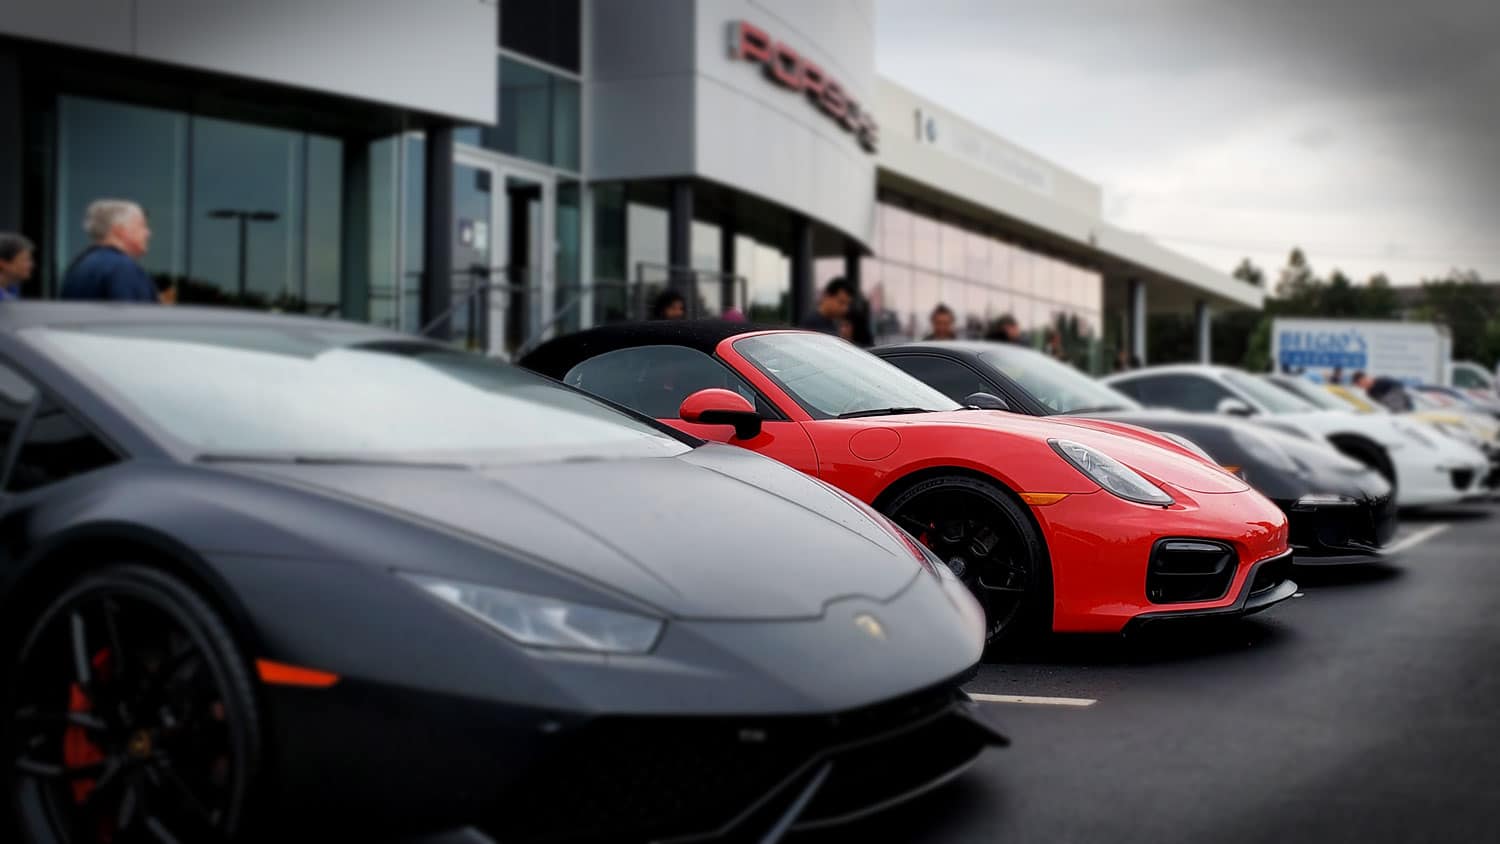 Lamborghini and Porsches at Motor Werks Cars & Coffee 2021.